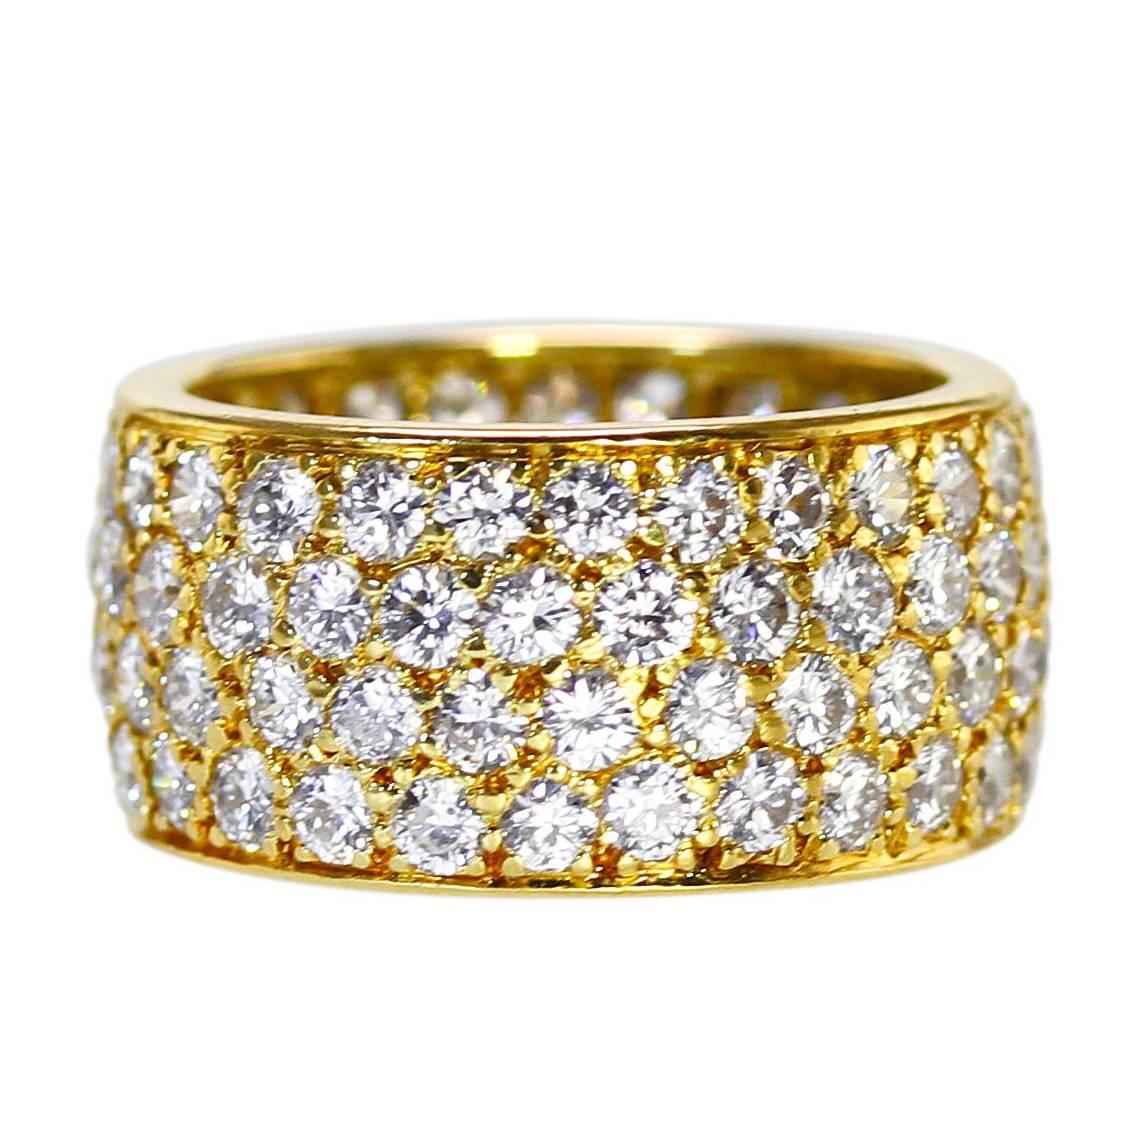 1970s Van Cleef & Arpels Diamond and Gold Band Ring